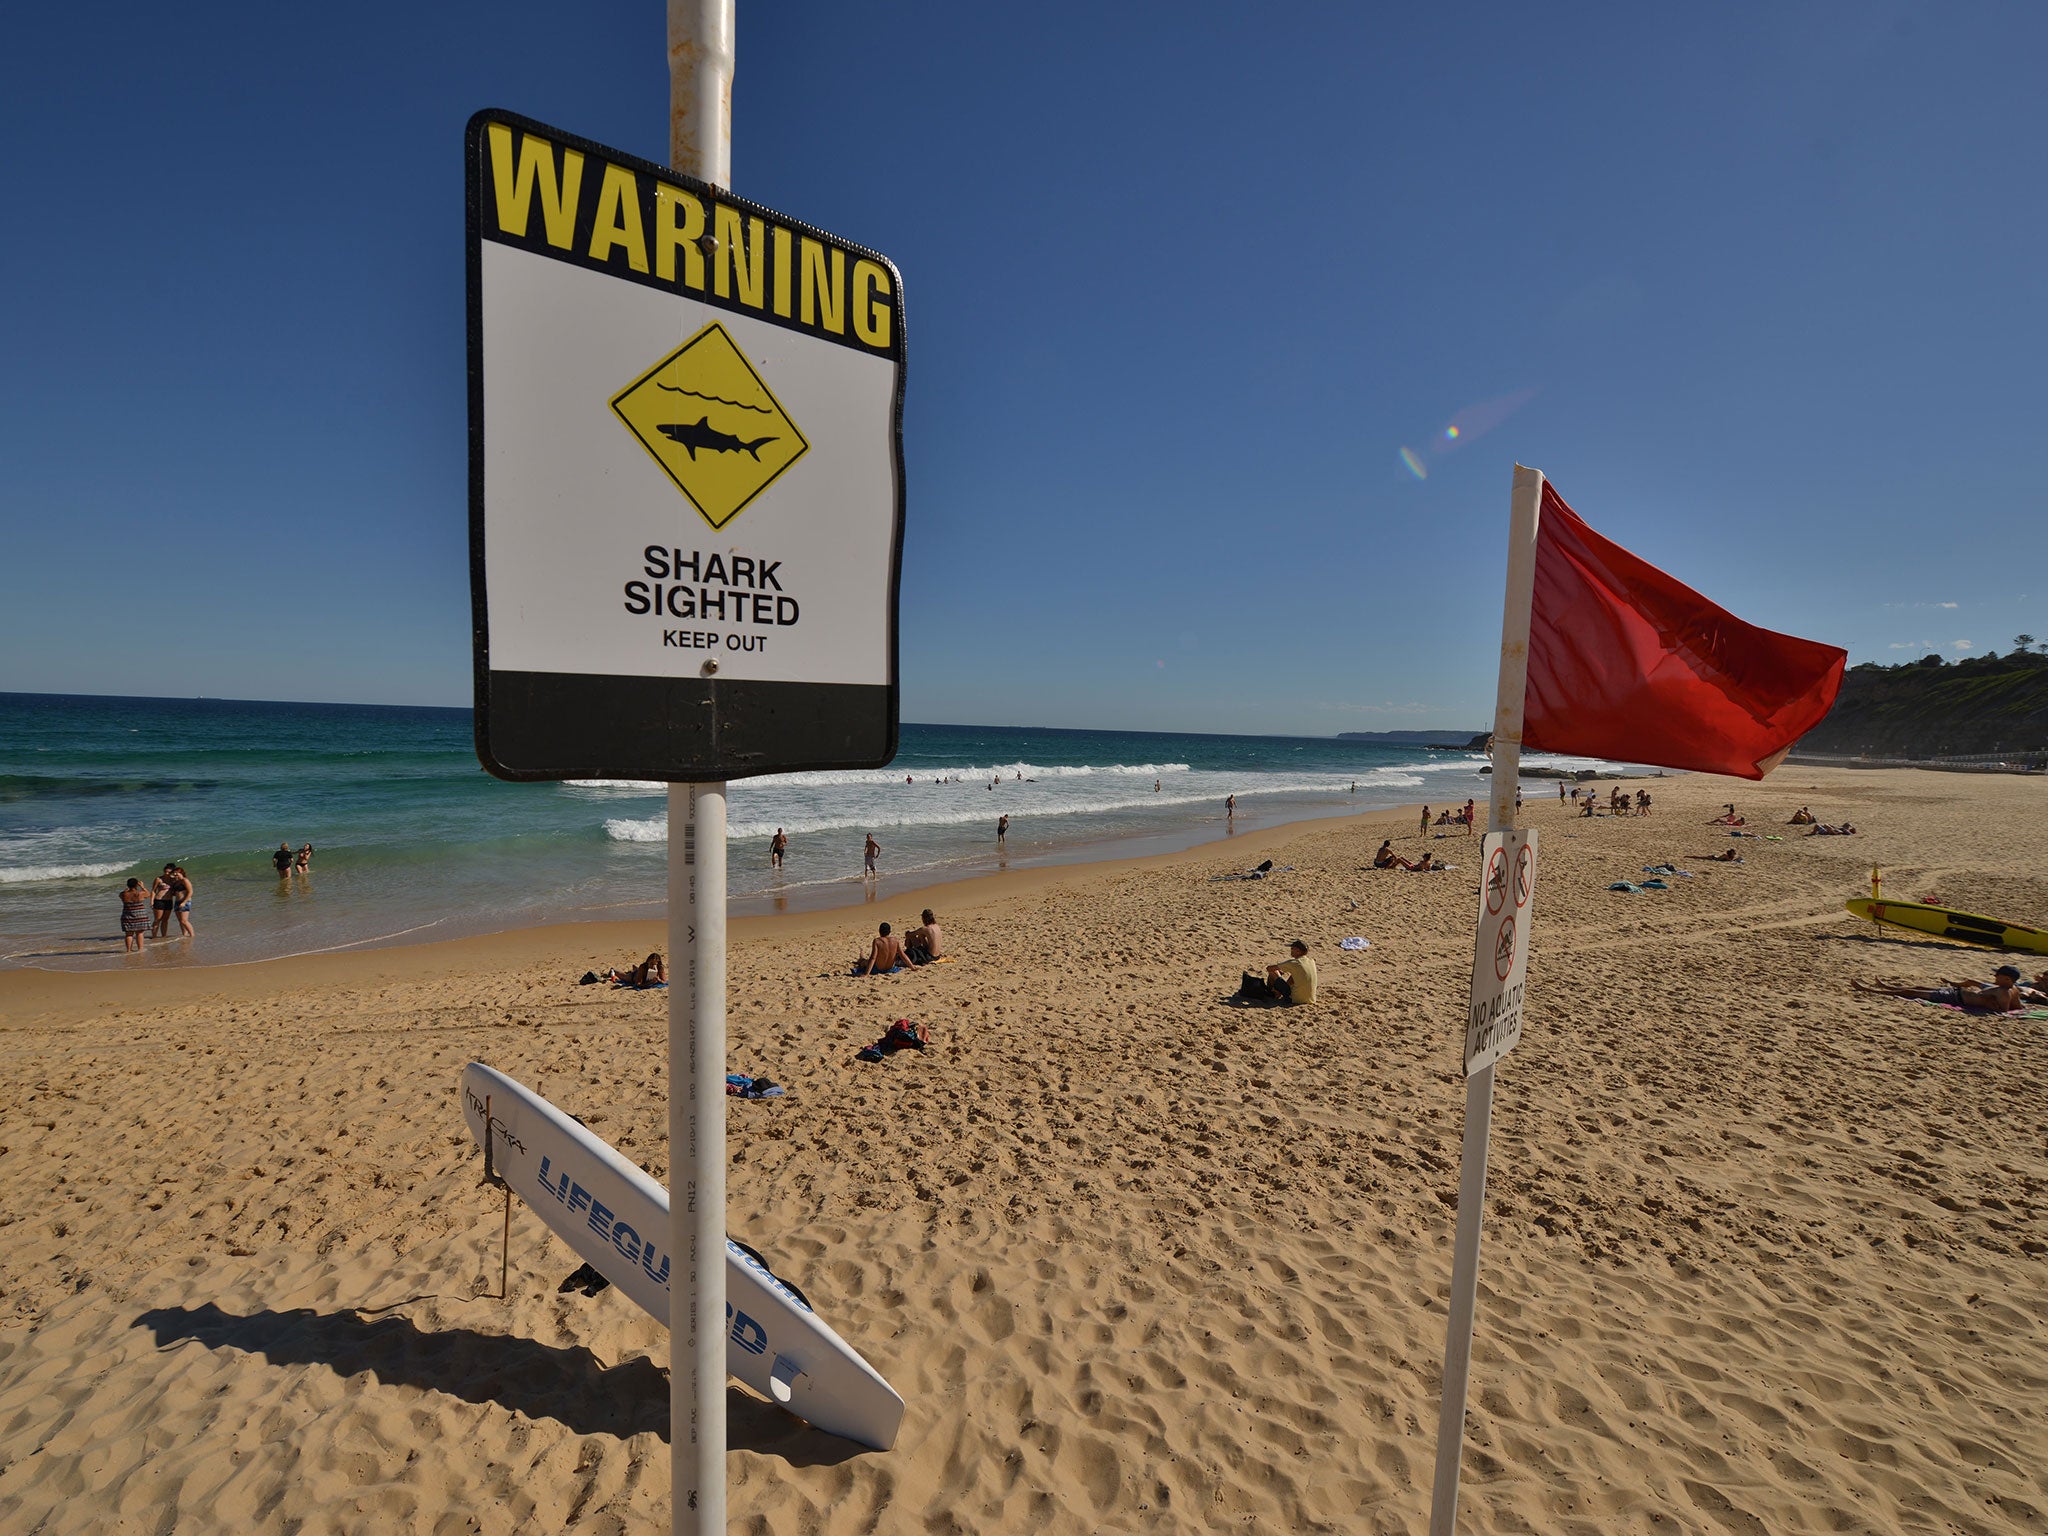 Shark warning signs are seen posted on the beach in the northern New South Wales city of Newcastle